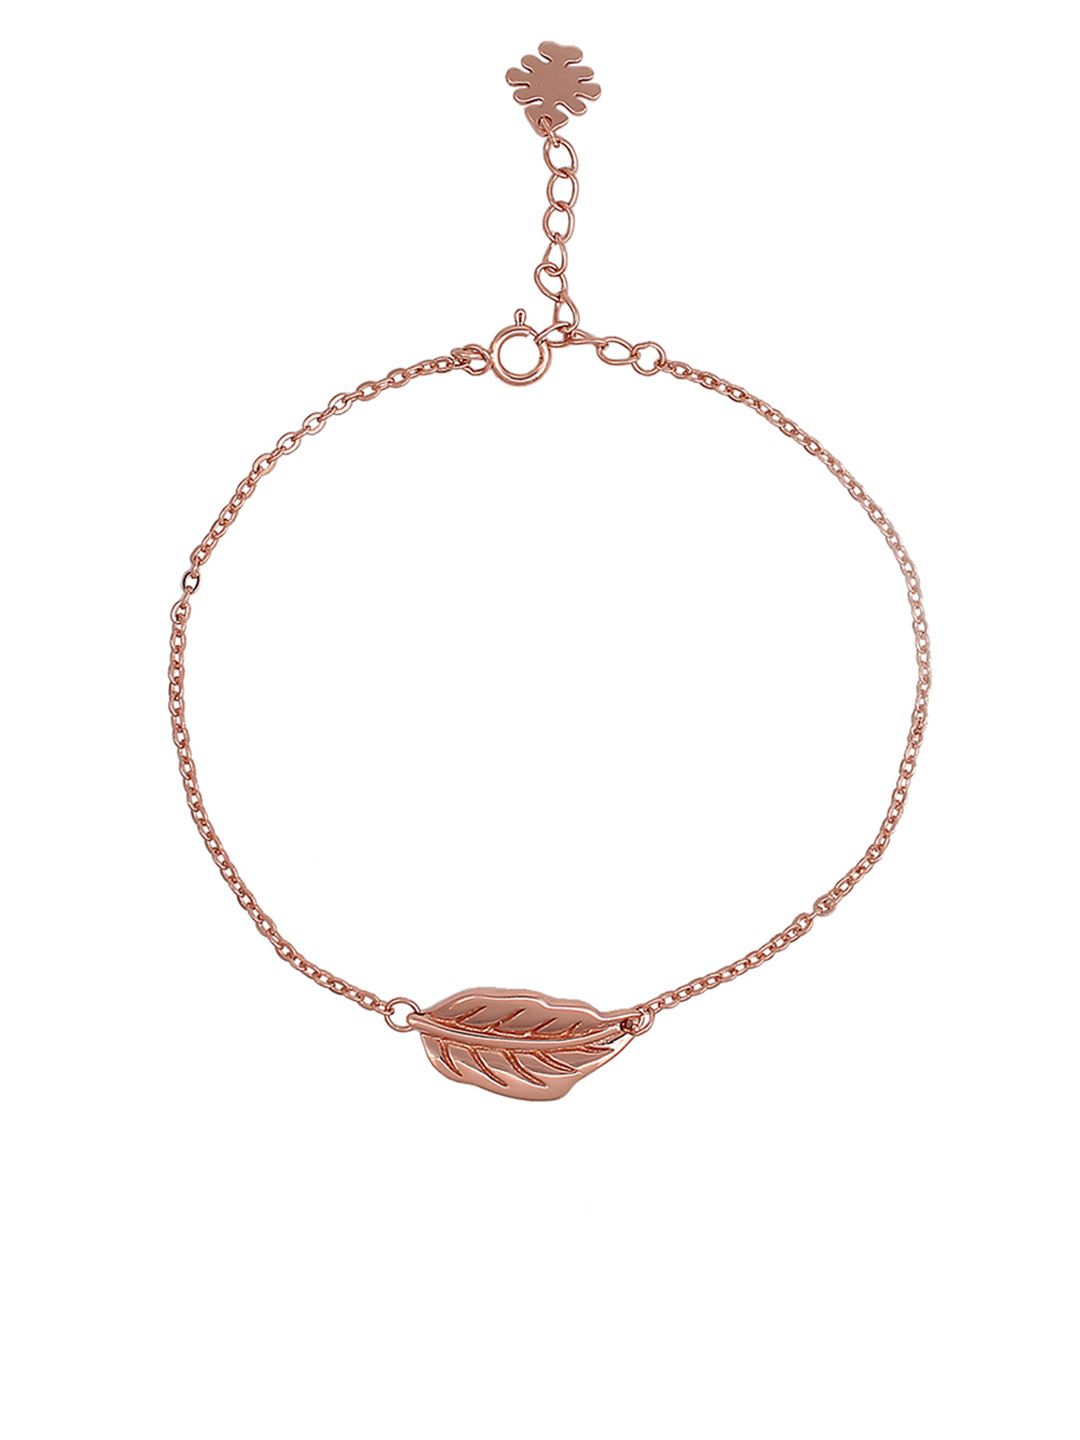 GIVA Sterling Silver Rose Gold-Plated Leaf Bracelet with 925 Stamp Price in India